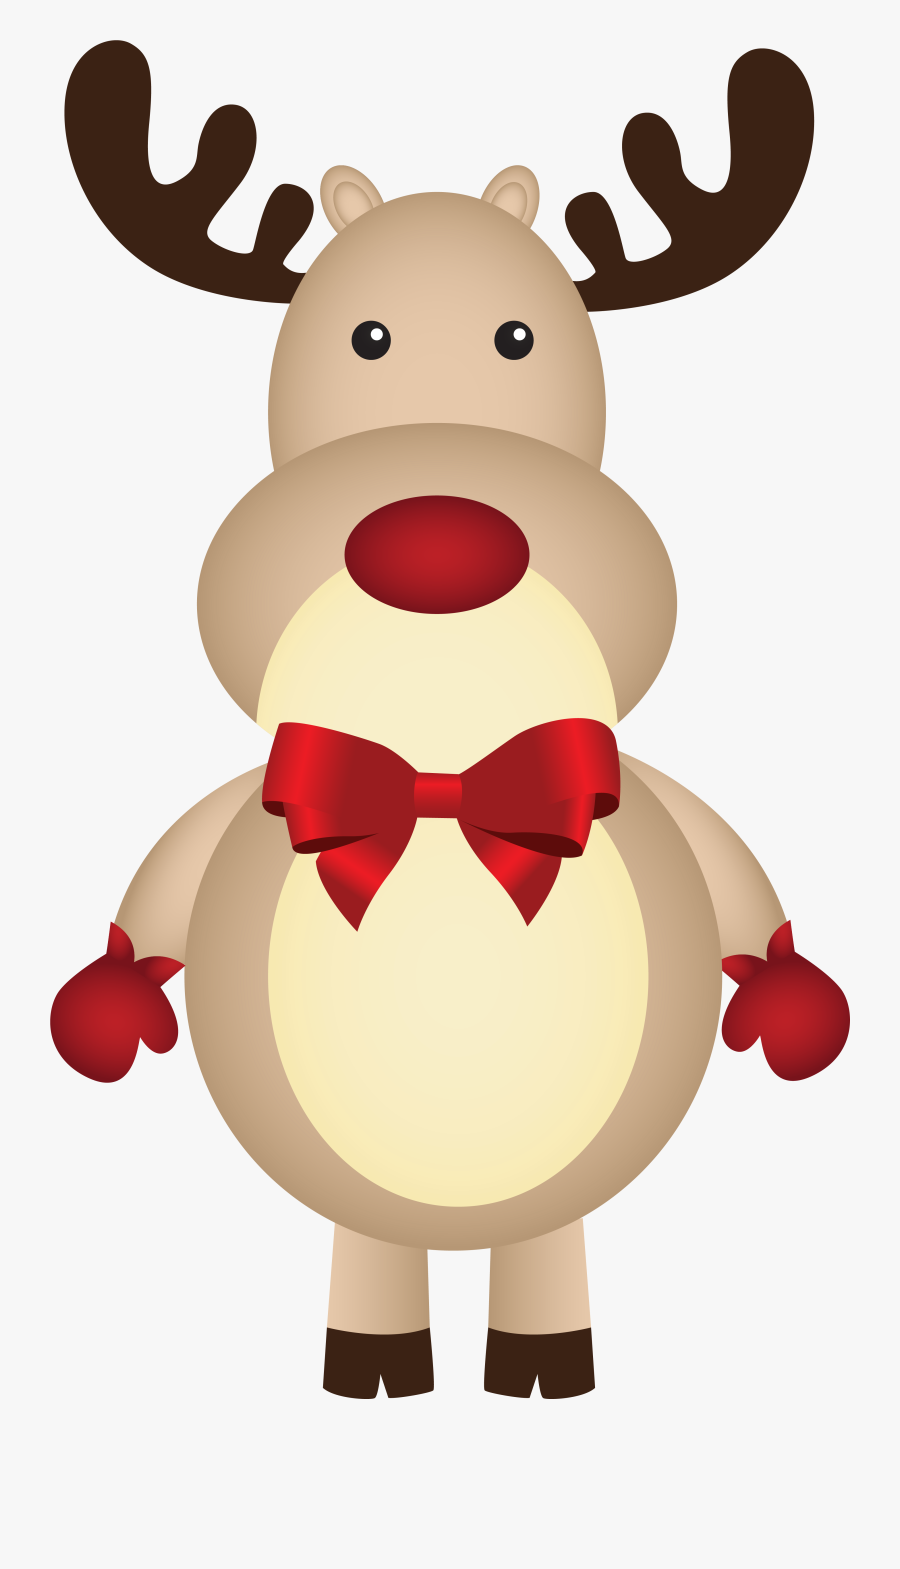 Christmas Rudolph With Bow Png Clipart Image - Christmas Rudolph Clipart, Transparent Clipart